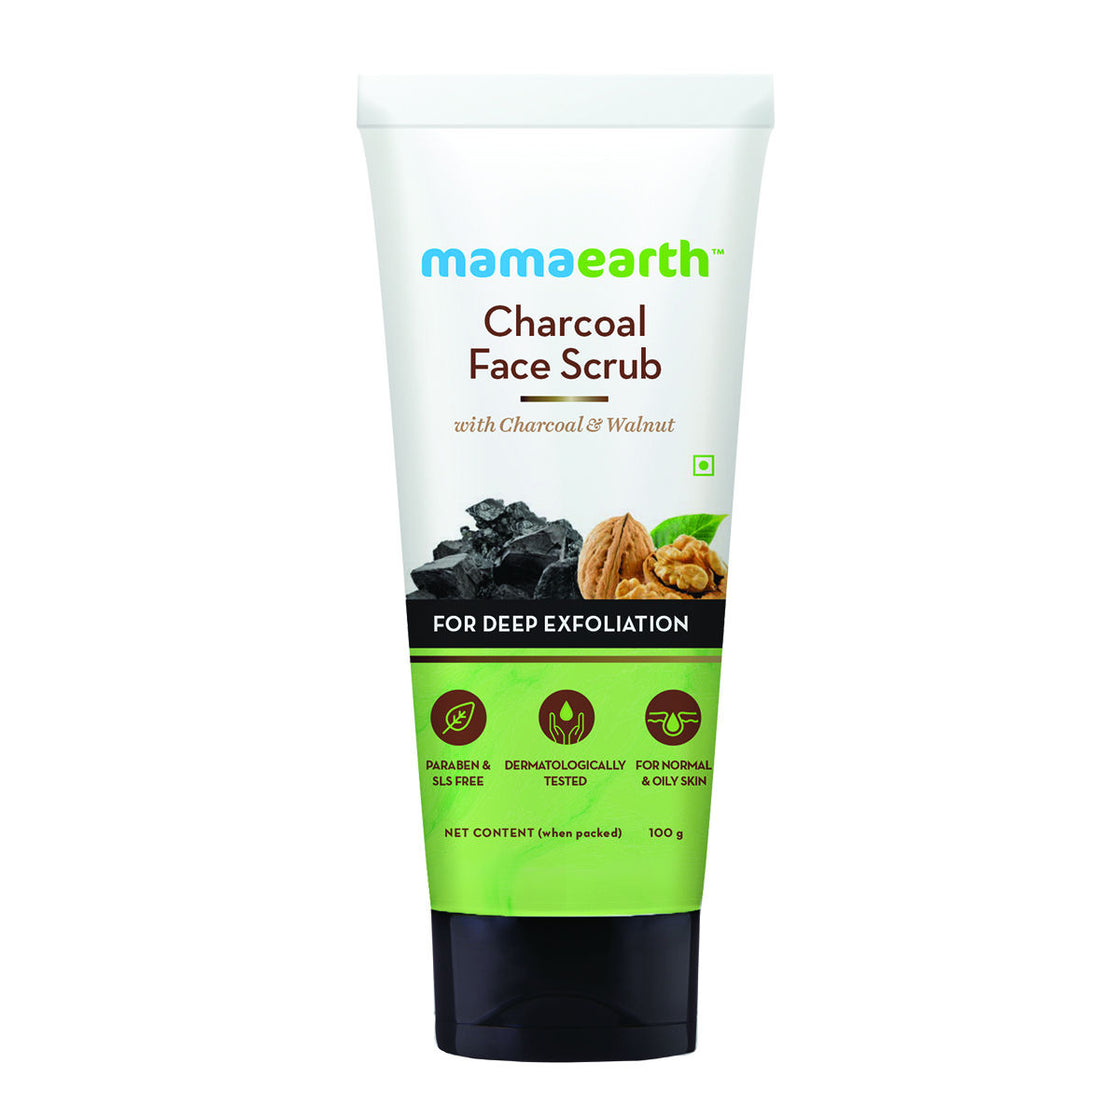 Mamaearth Charcoal Face Scrub For Oily Skin & Normal Skin With Charcoal & Walnut